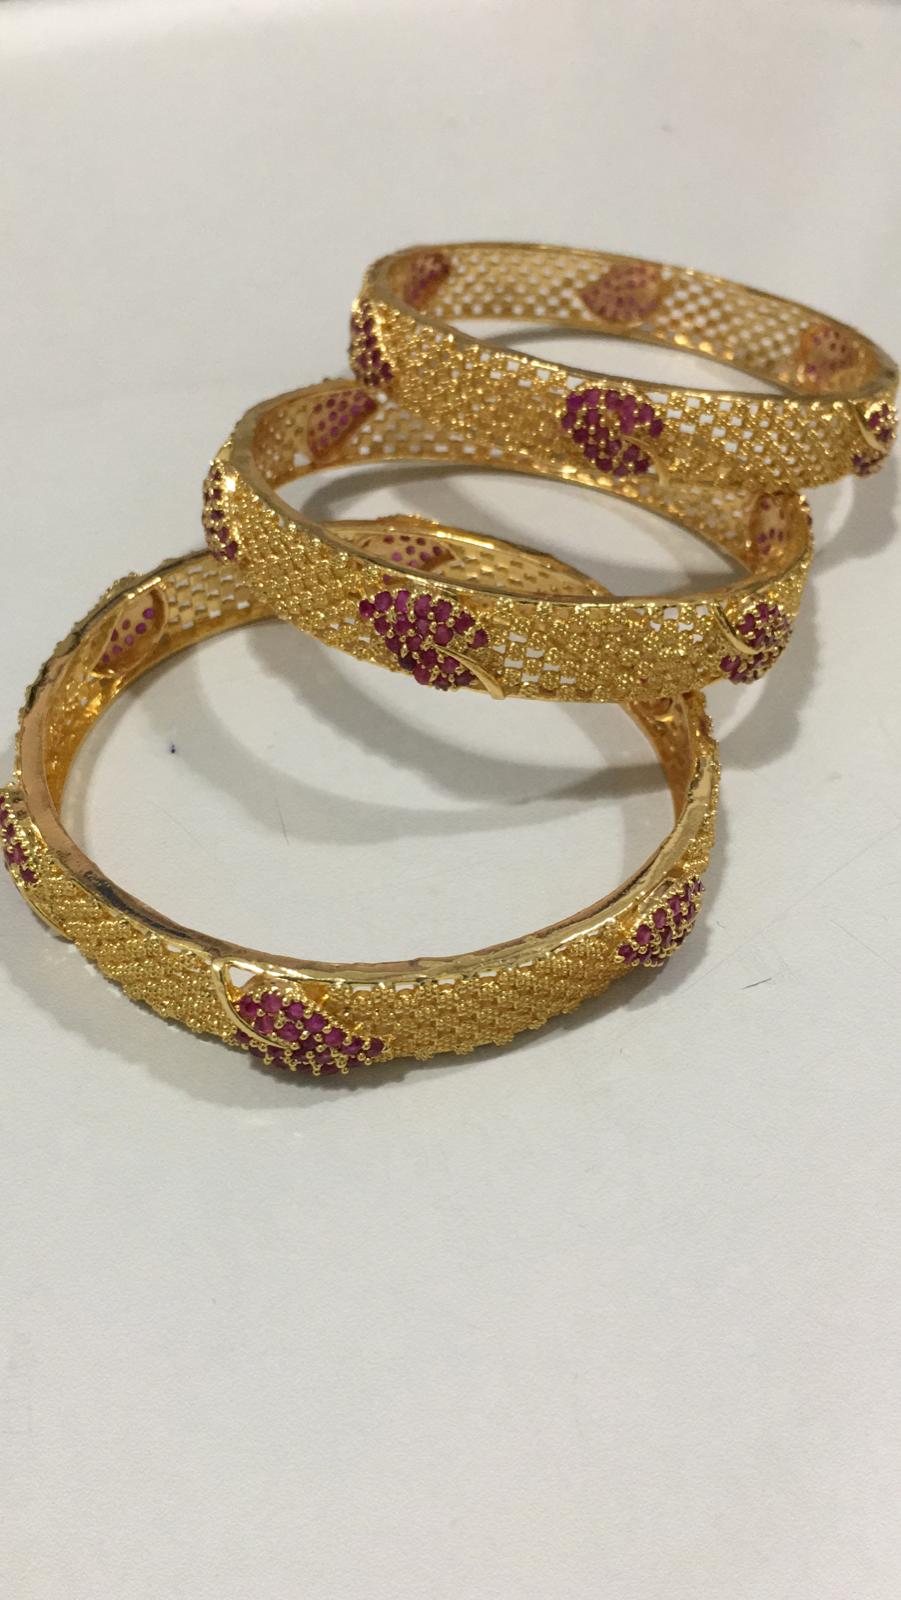 157612C $20.00 1PC BANGLE GOLD PLATED